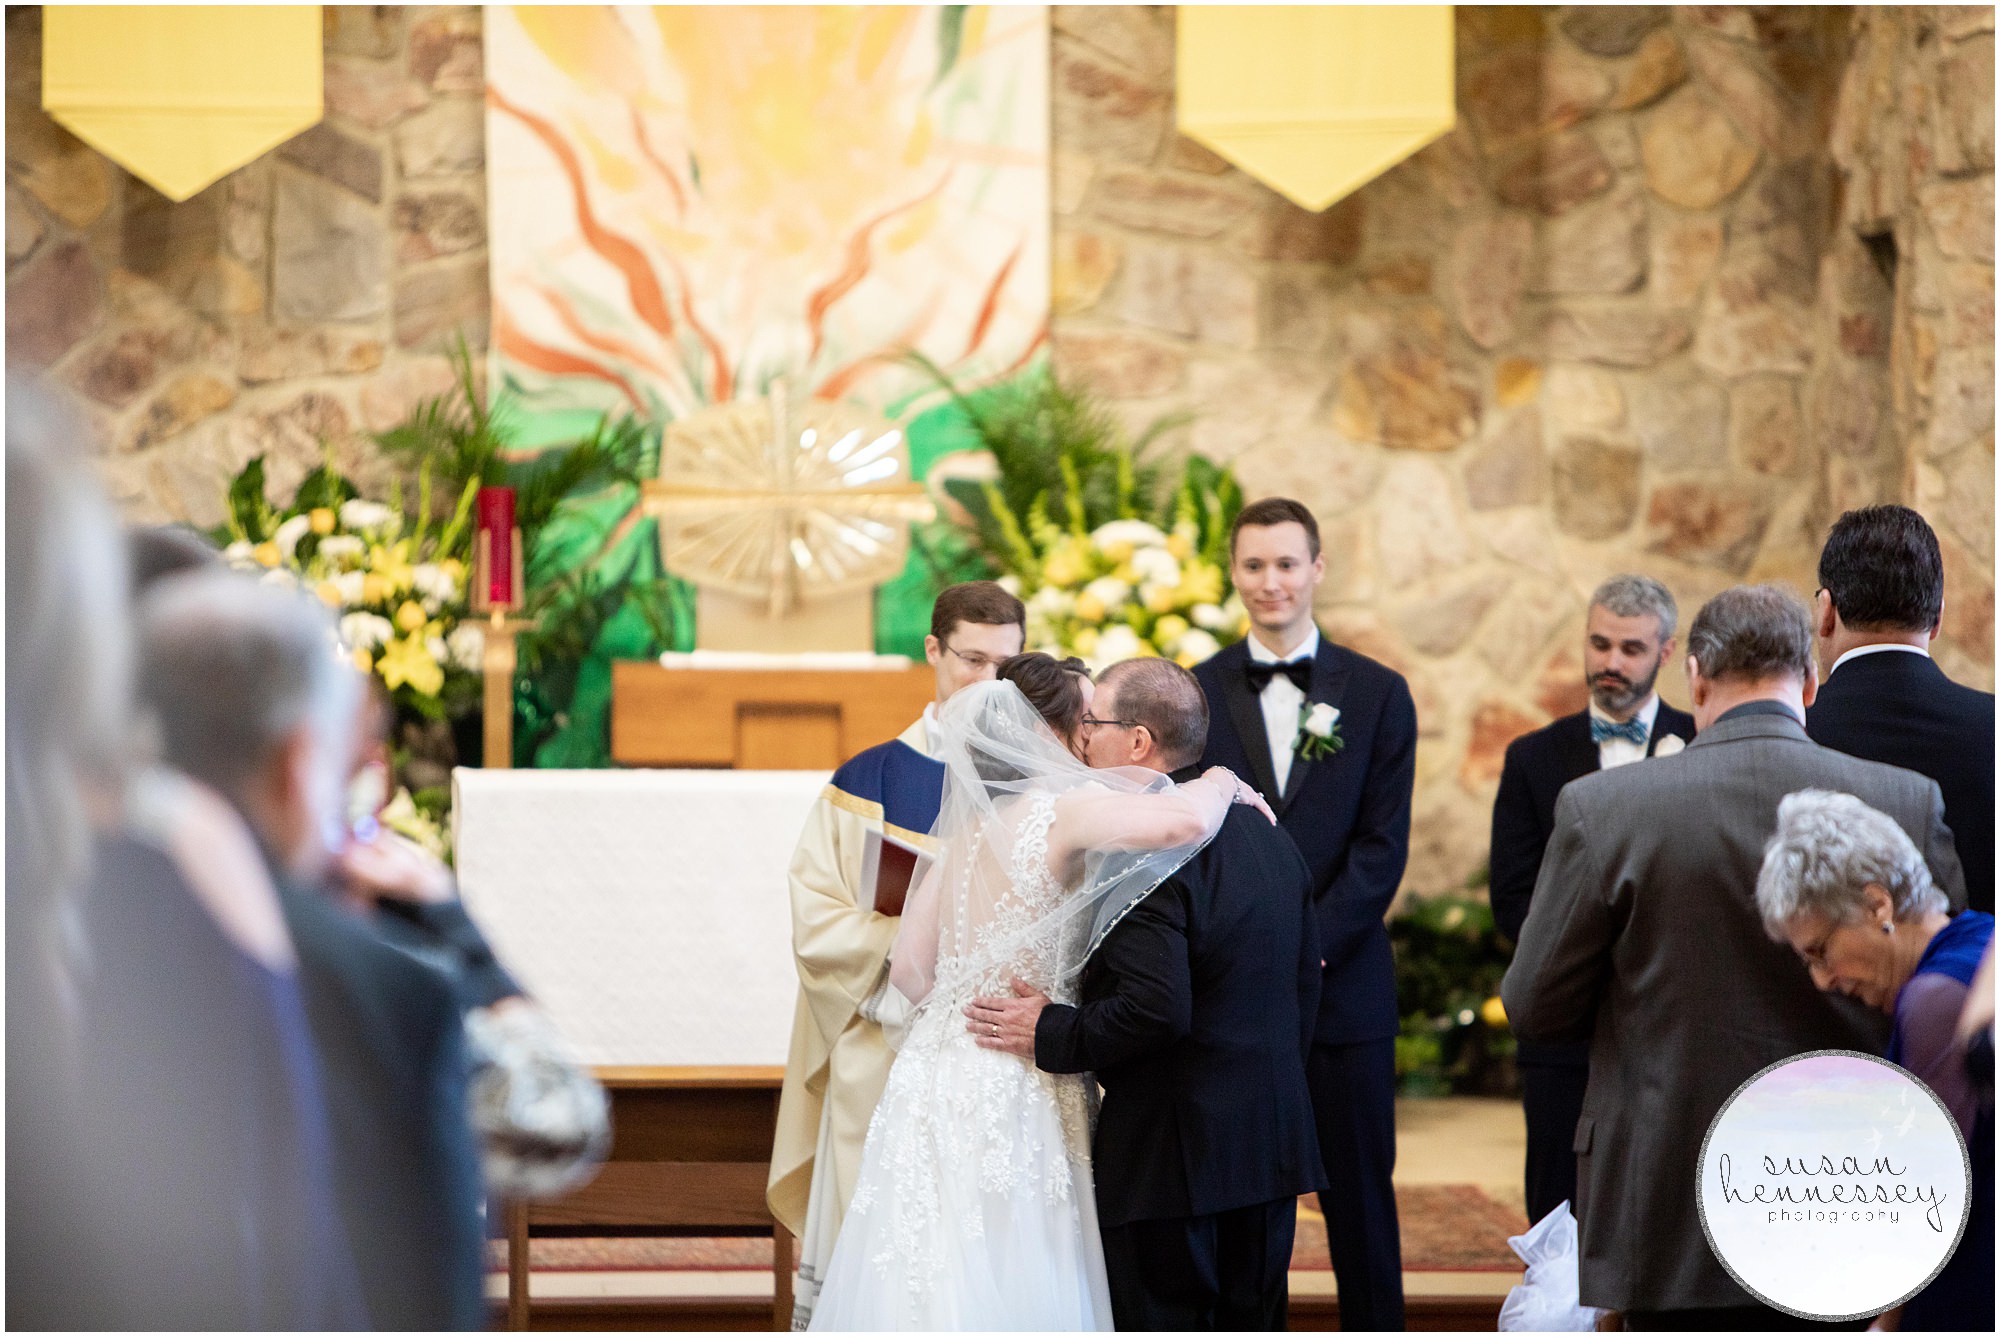 Father gives bride away at Spring wedding.